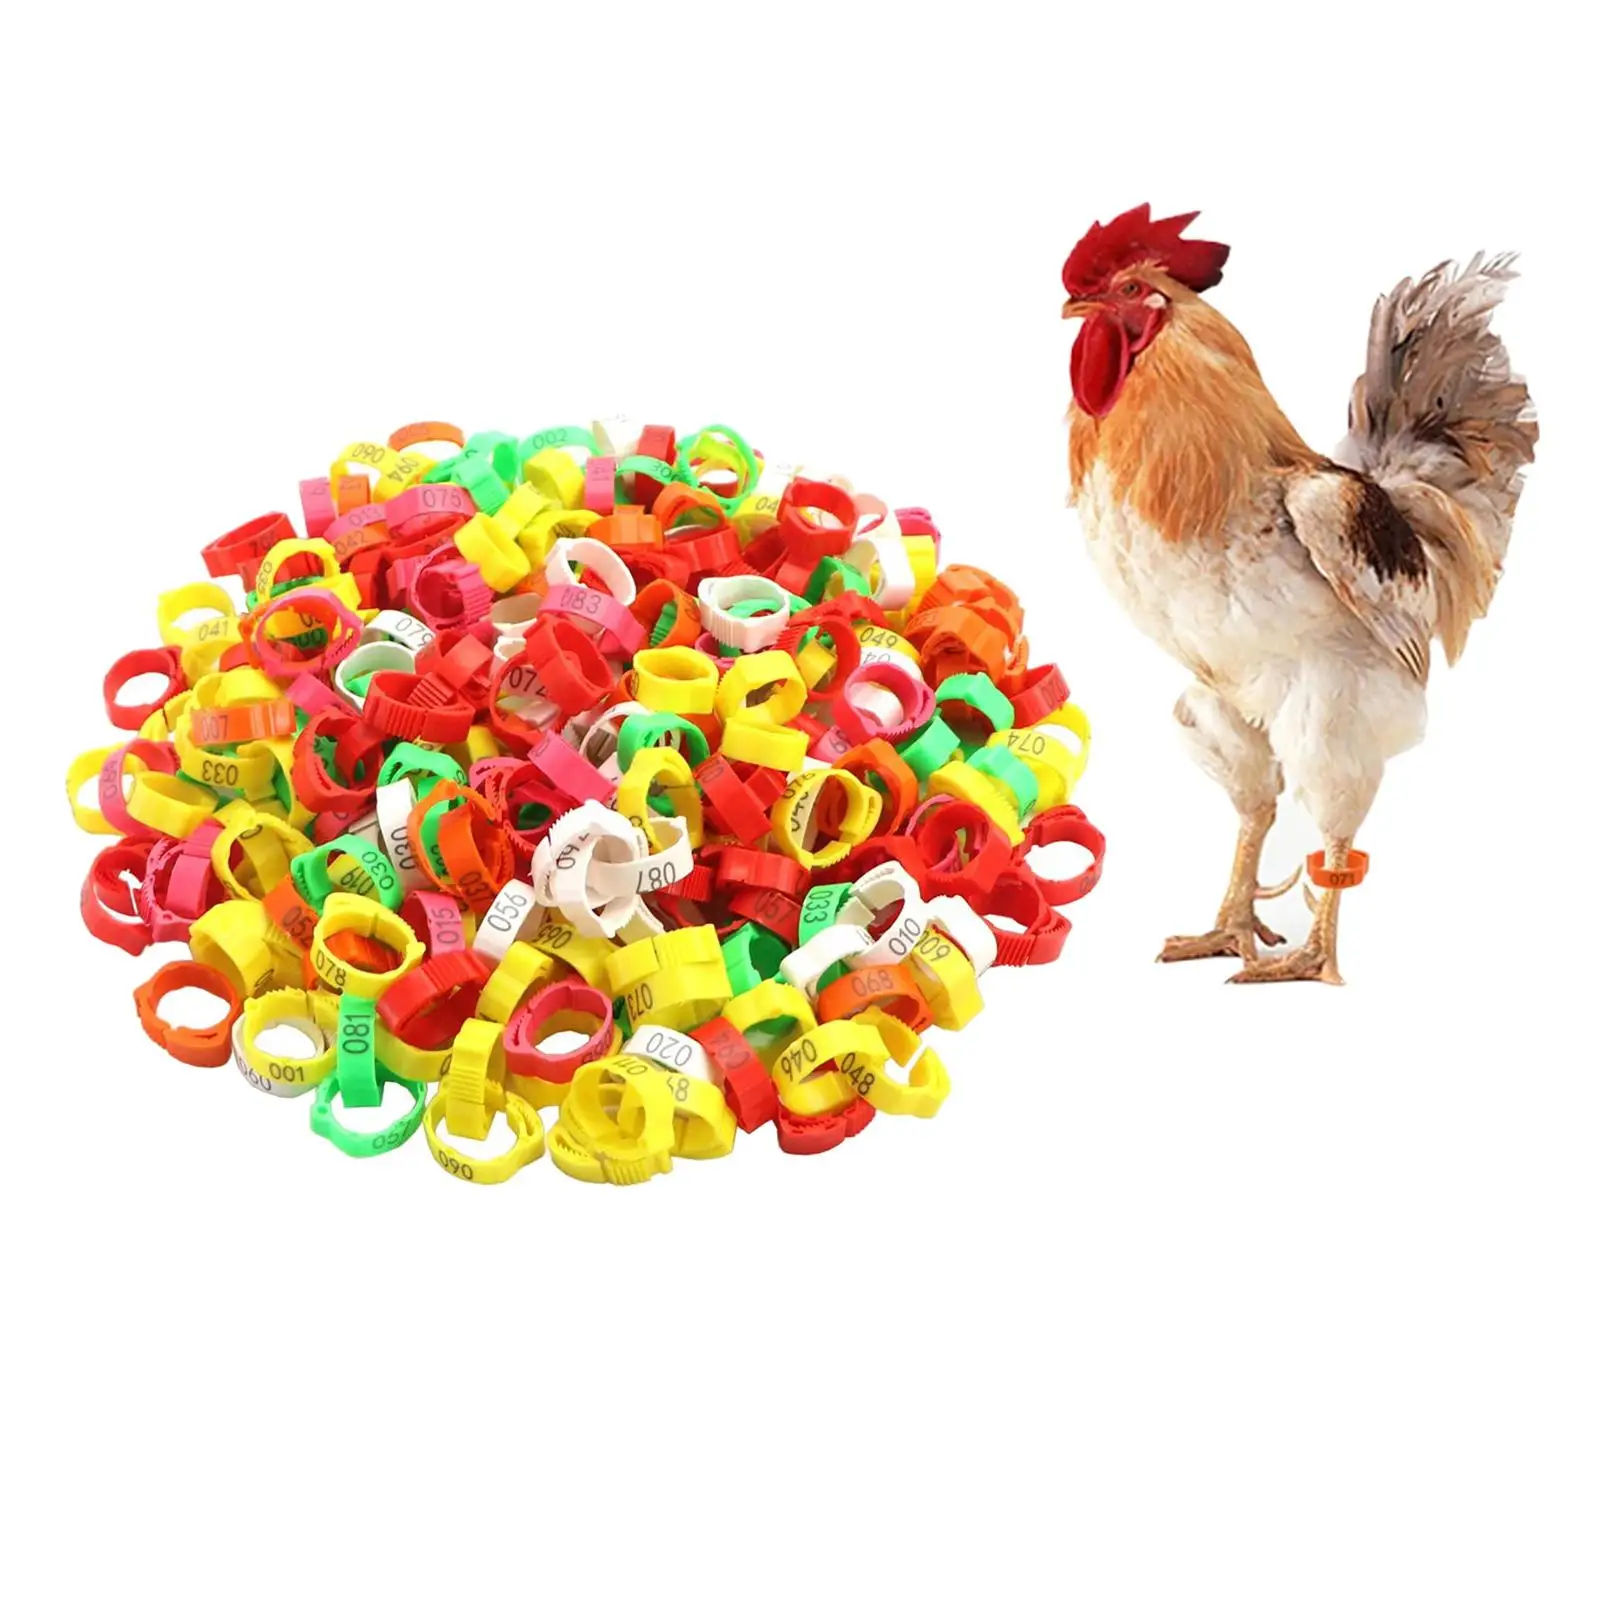 100x Poultry Foot Bands, Poultry Foot Rings, Chicken Identification Band for Birds